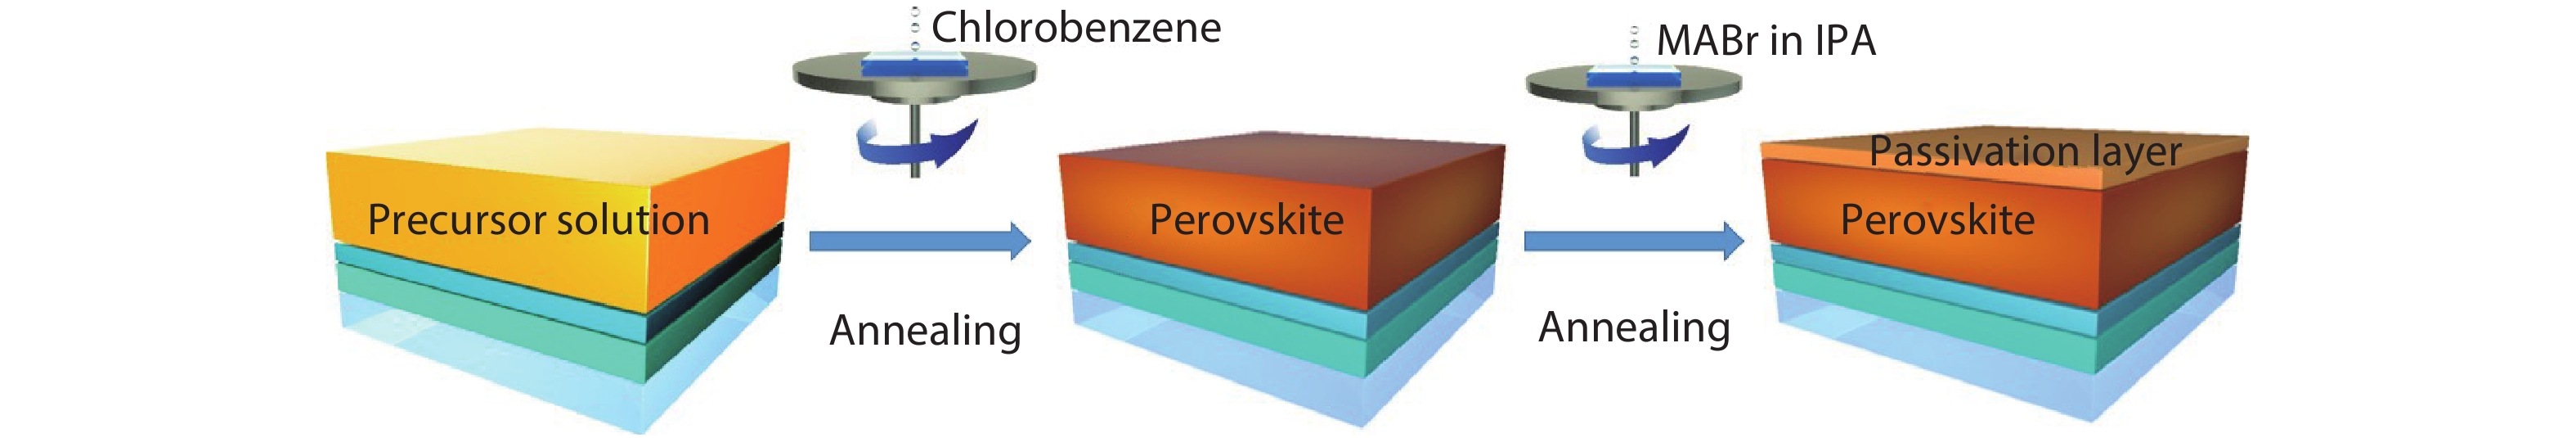 (Color online) Schematic diagram of the formation of passivation layer.